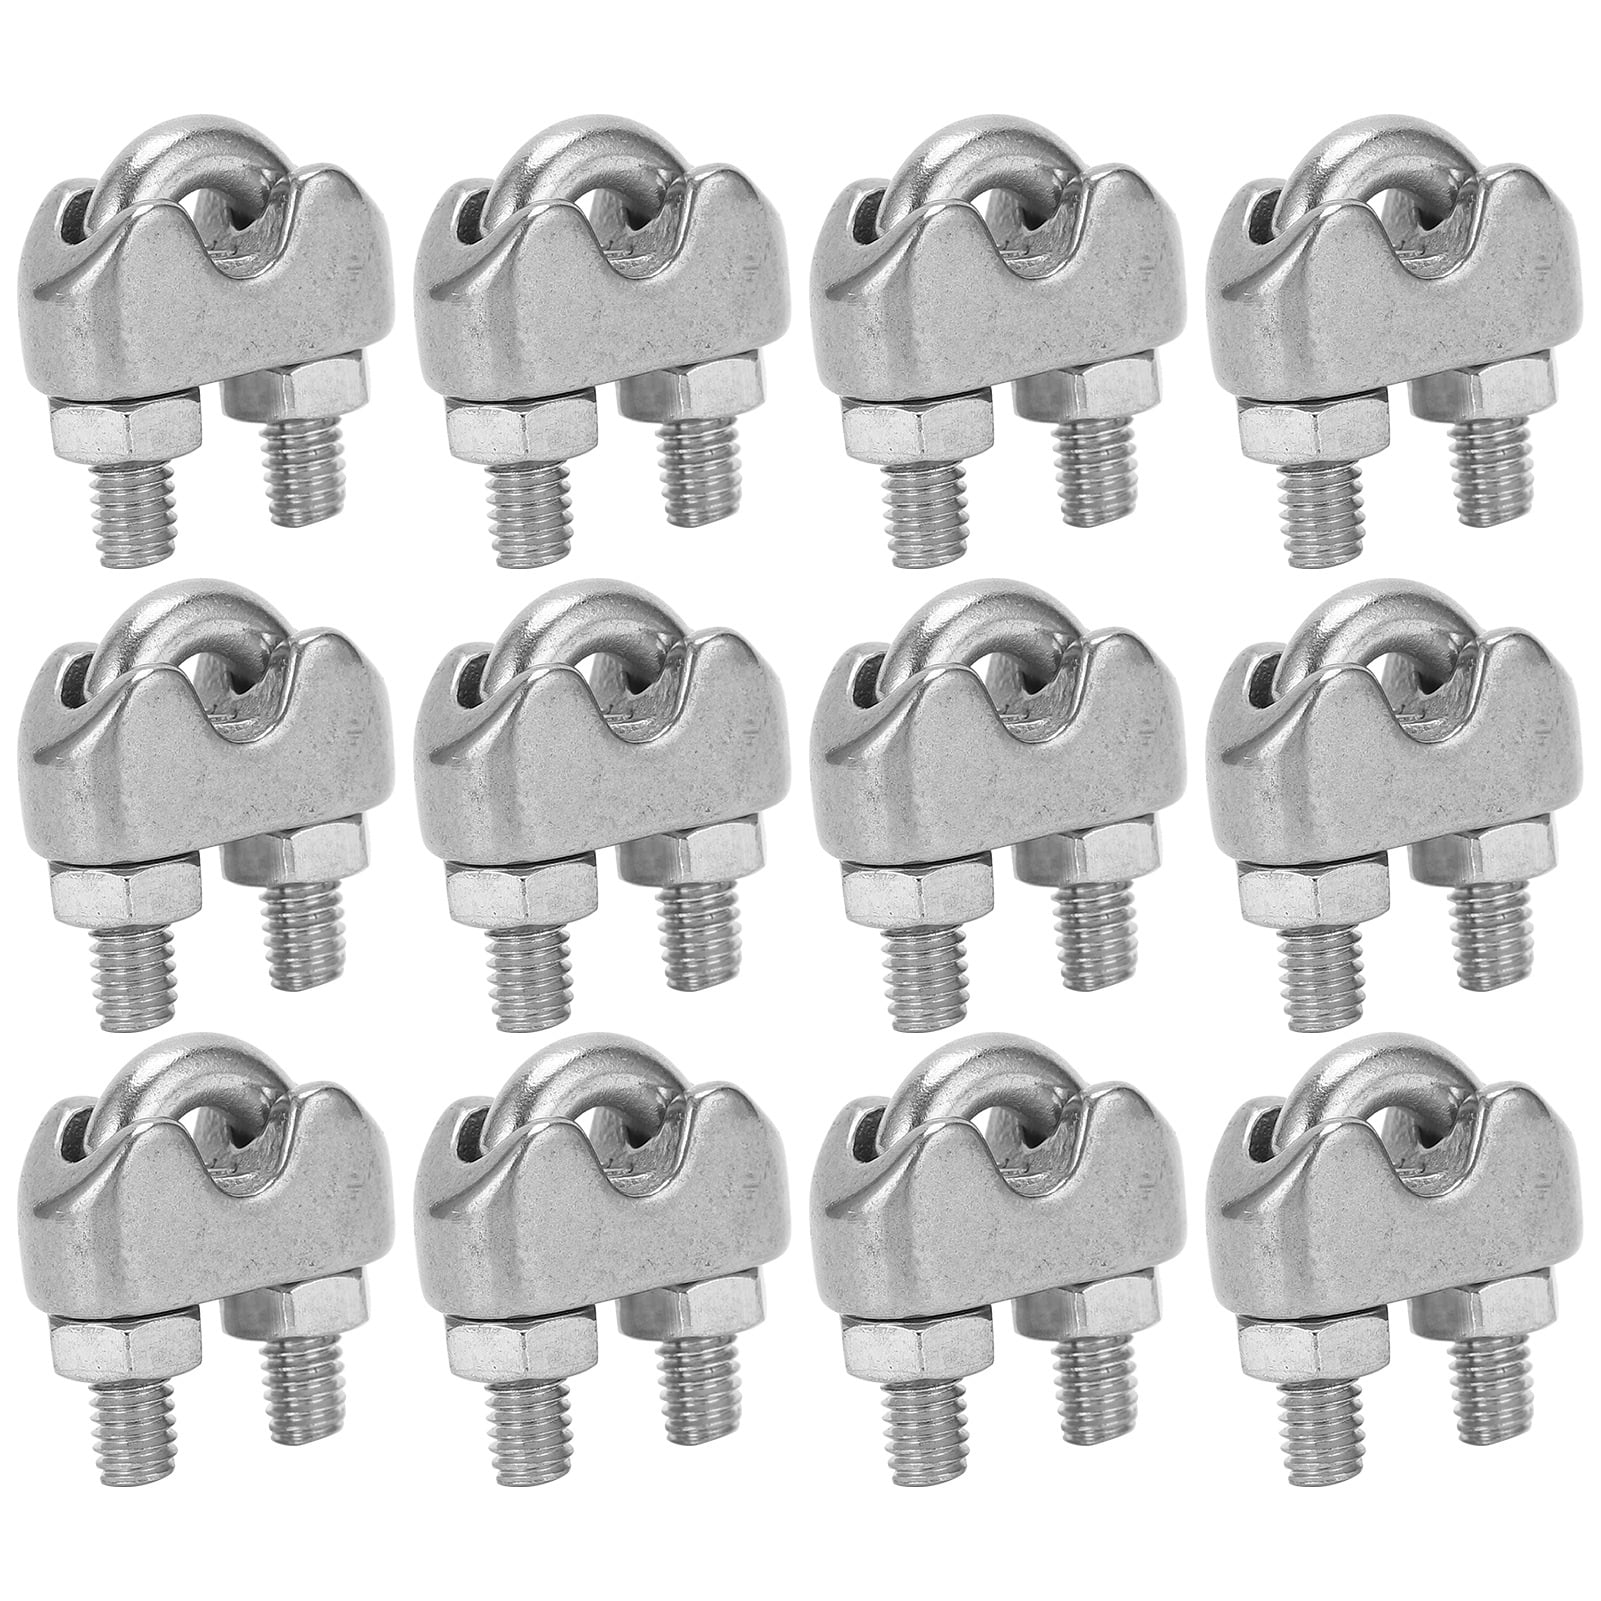 Cable Wire Rope Cable Clip Clamp Stainless Steel U Bolts Saddle Clamp 12pcs 1/8 Inch M3 Wire Rope Cable Clip Used for Wire Rope